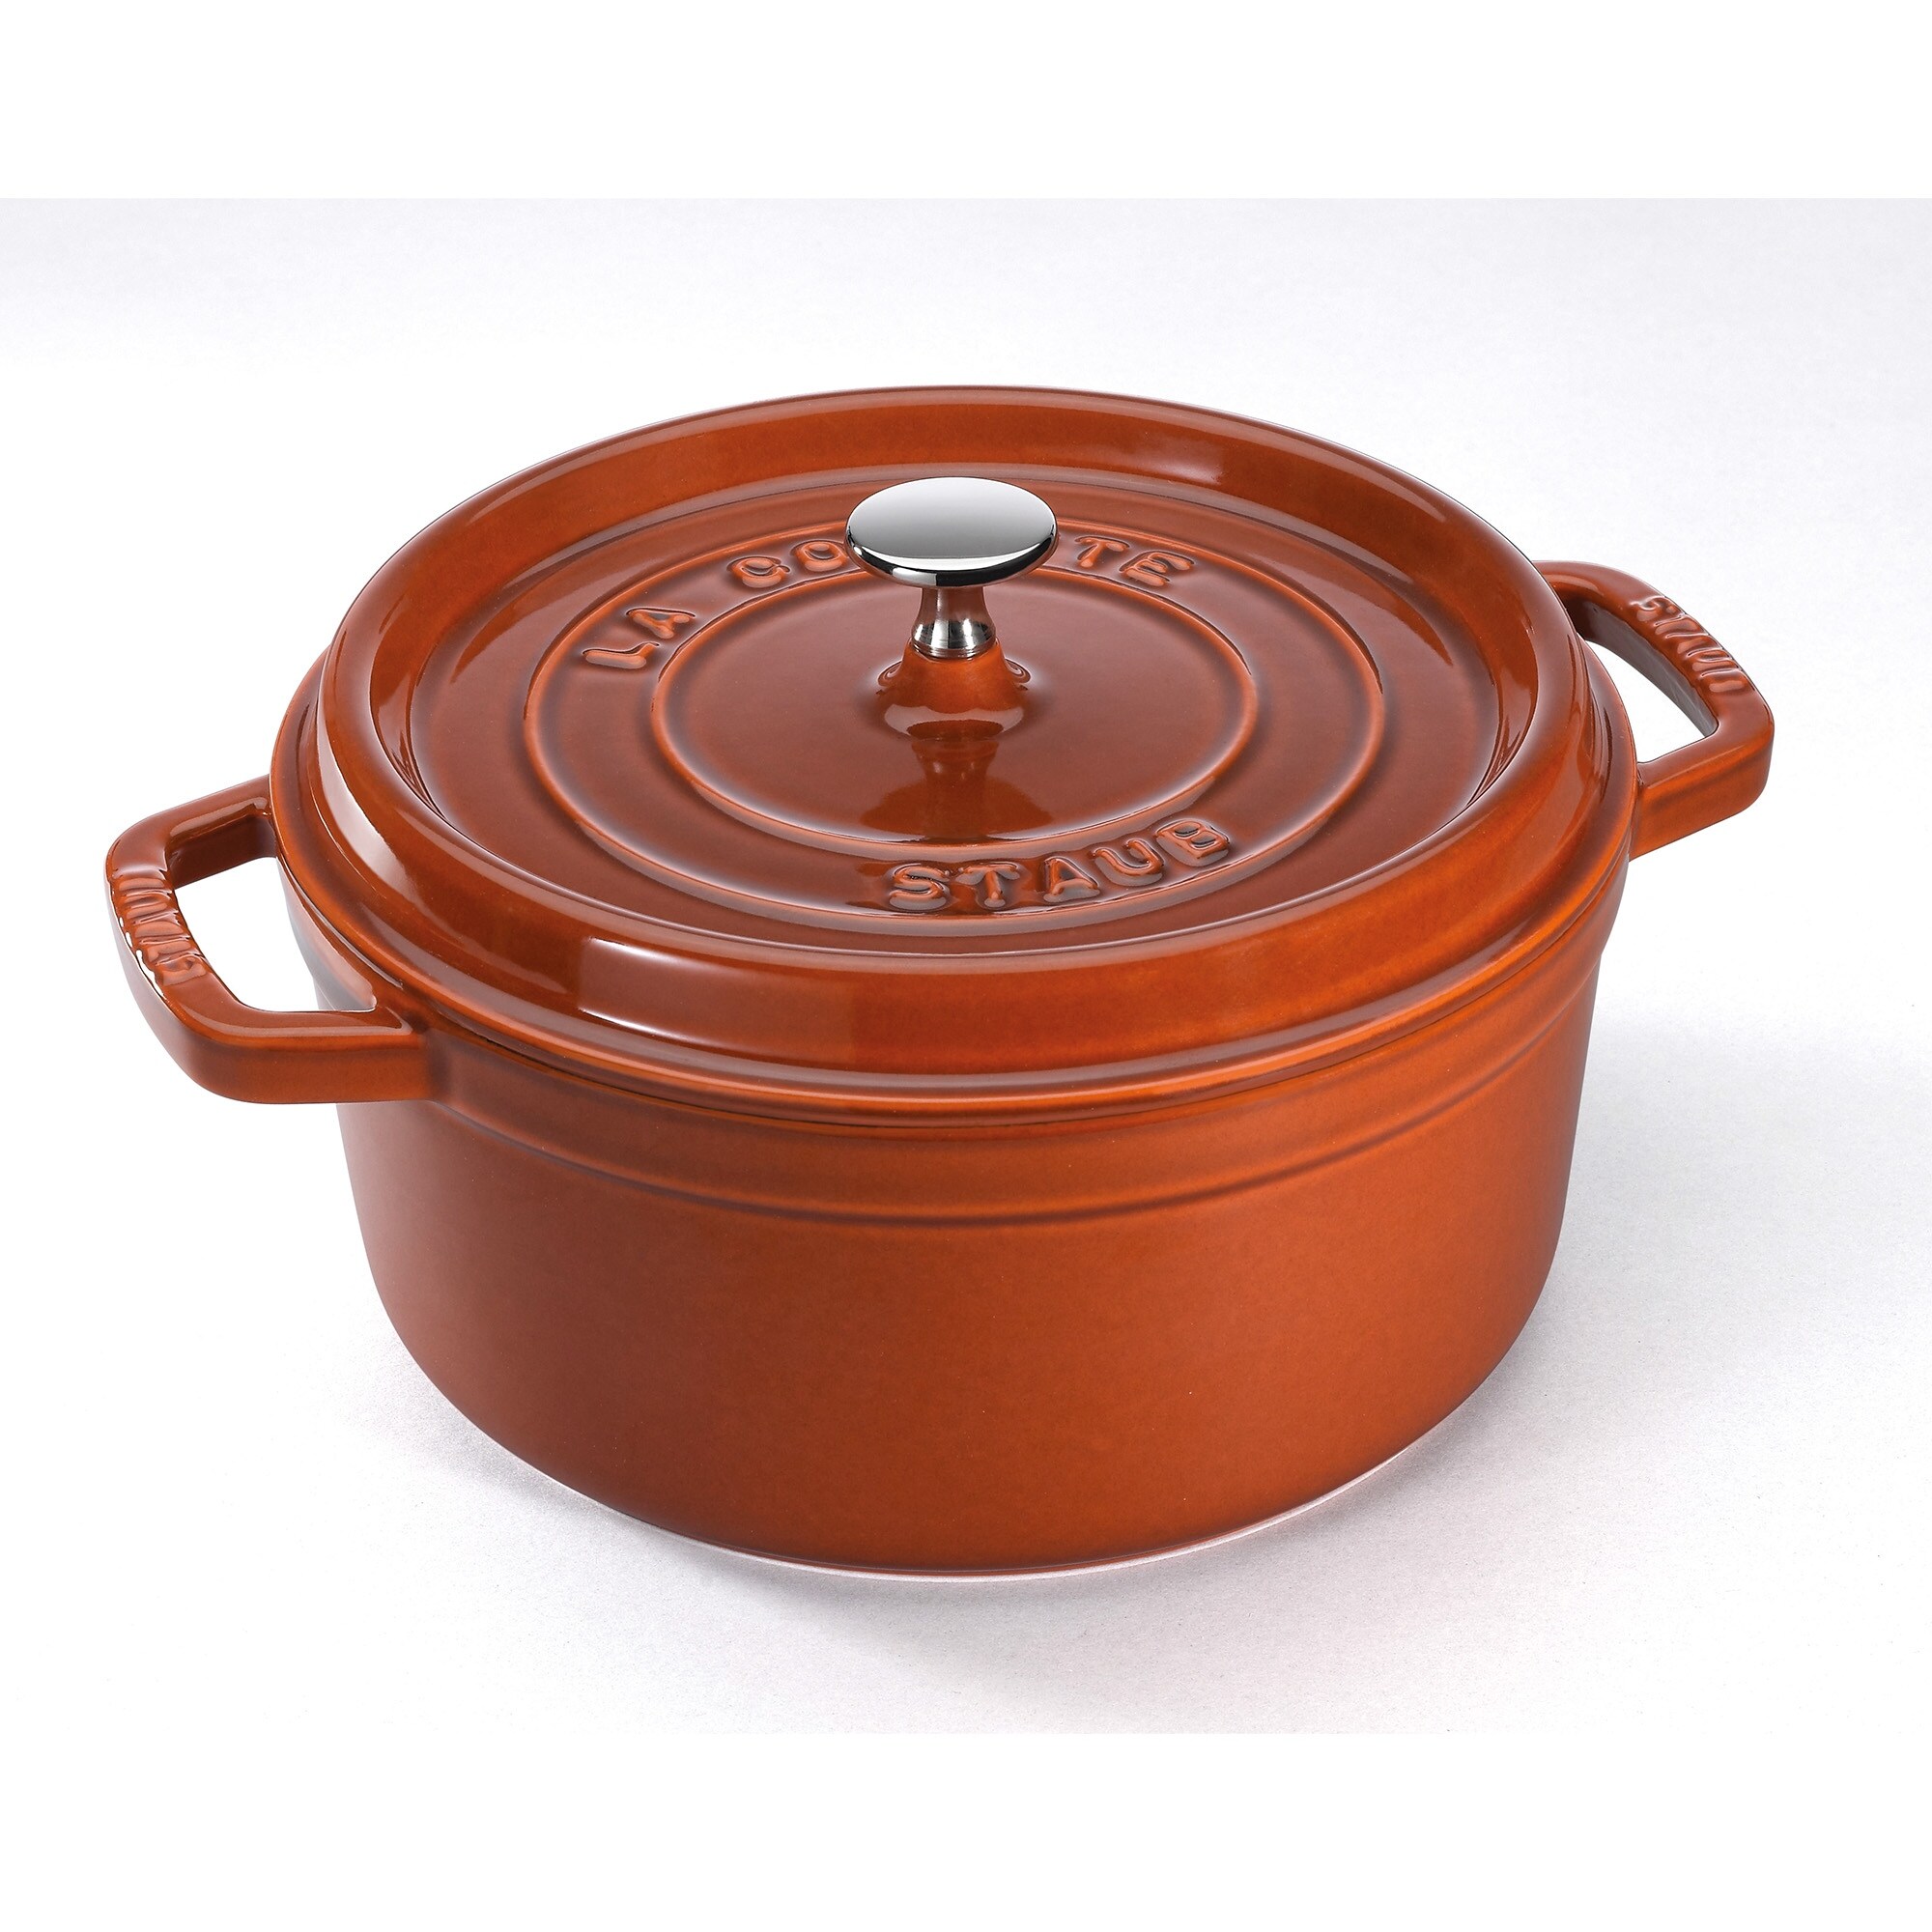 https://ak1.ostkcdn.com/images/products/is/images/direct/4101189166e7f4c520ad4f07cf650fb3c02ee8c8/STAUB-Cast-Iron-2.75-qt-Round-Cocotte.jpg